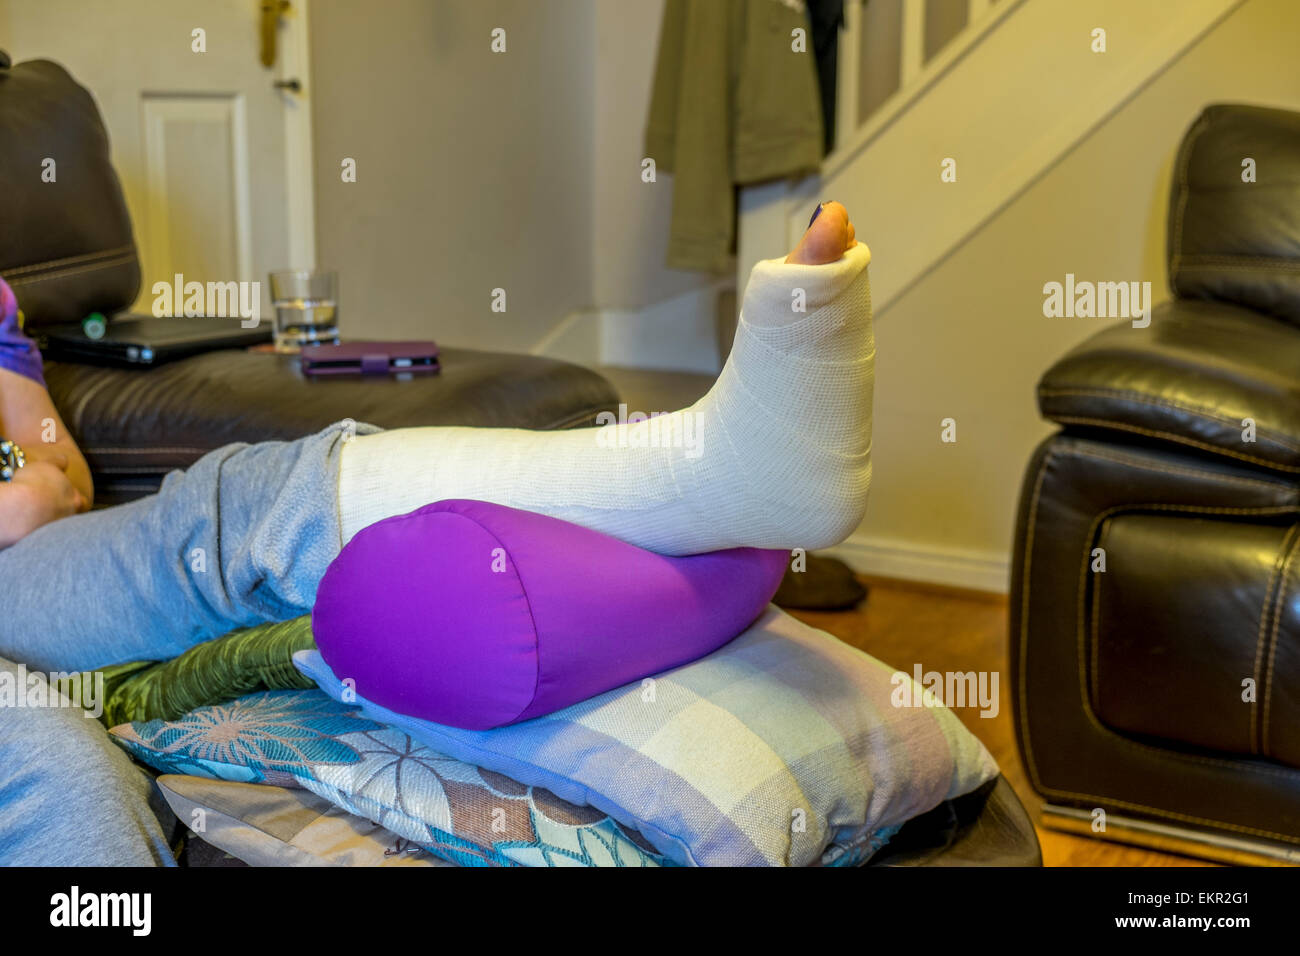 Lady with a broken ankle with her leg in an elevated position Stock Photo